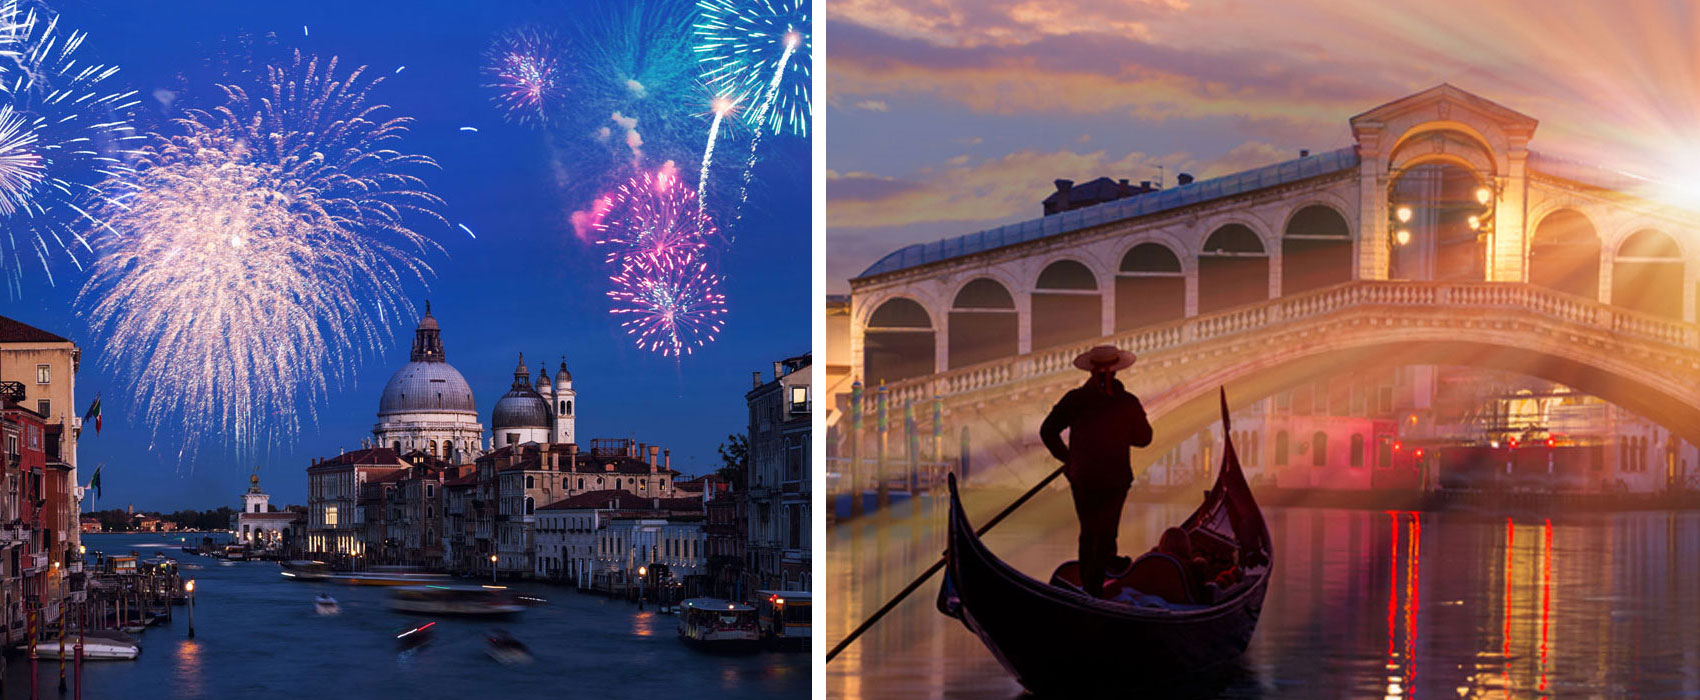 Venice from 29/12 to 01/01: New Year's Eve in Venice